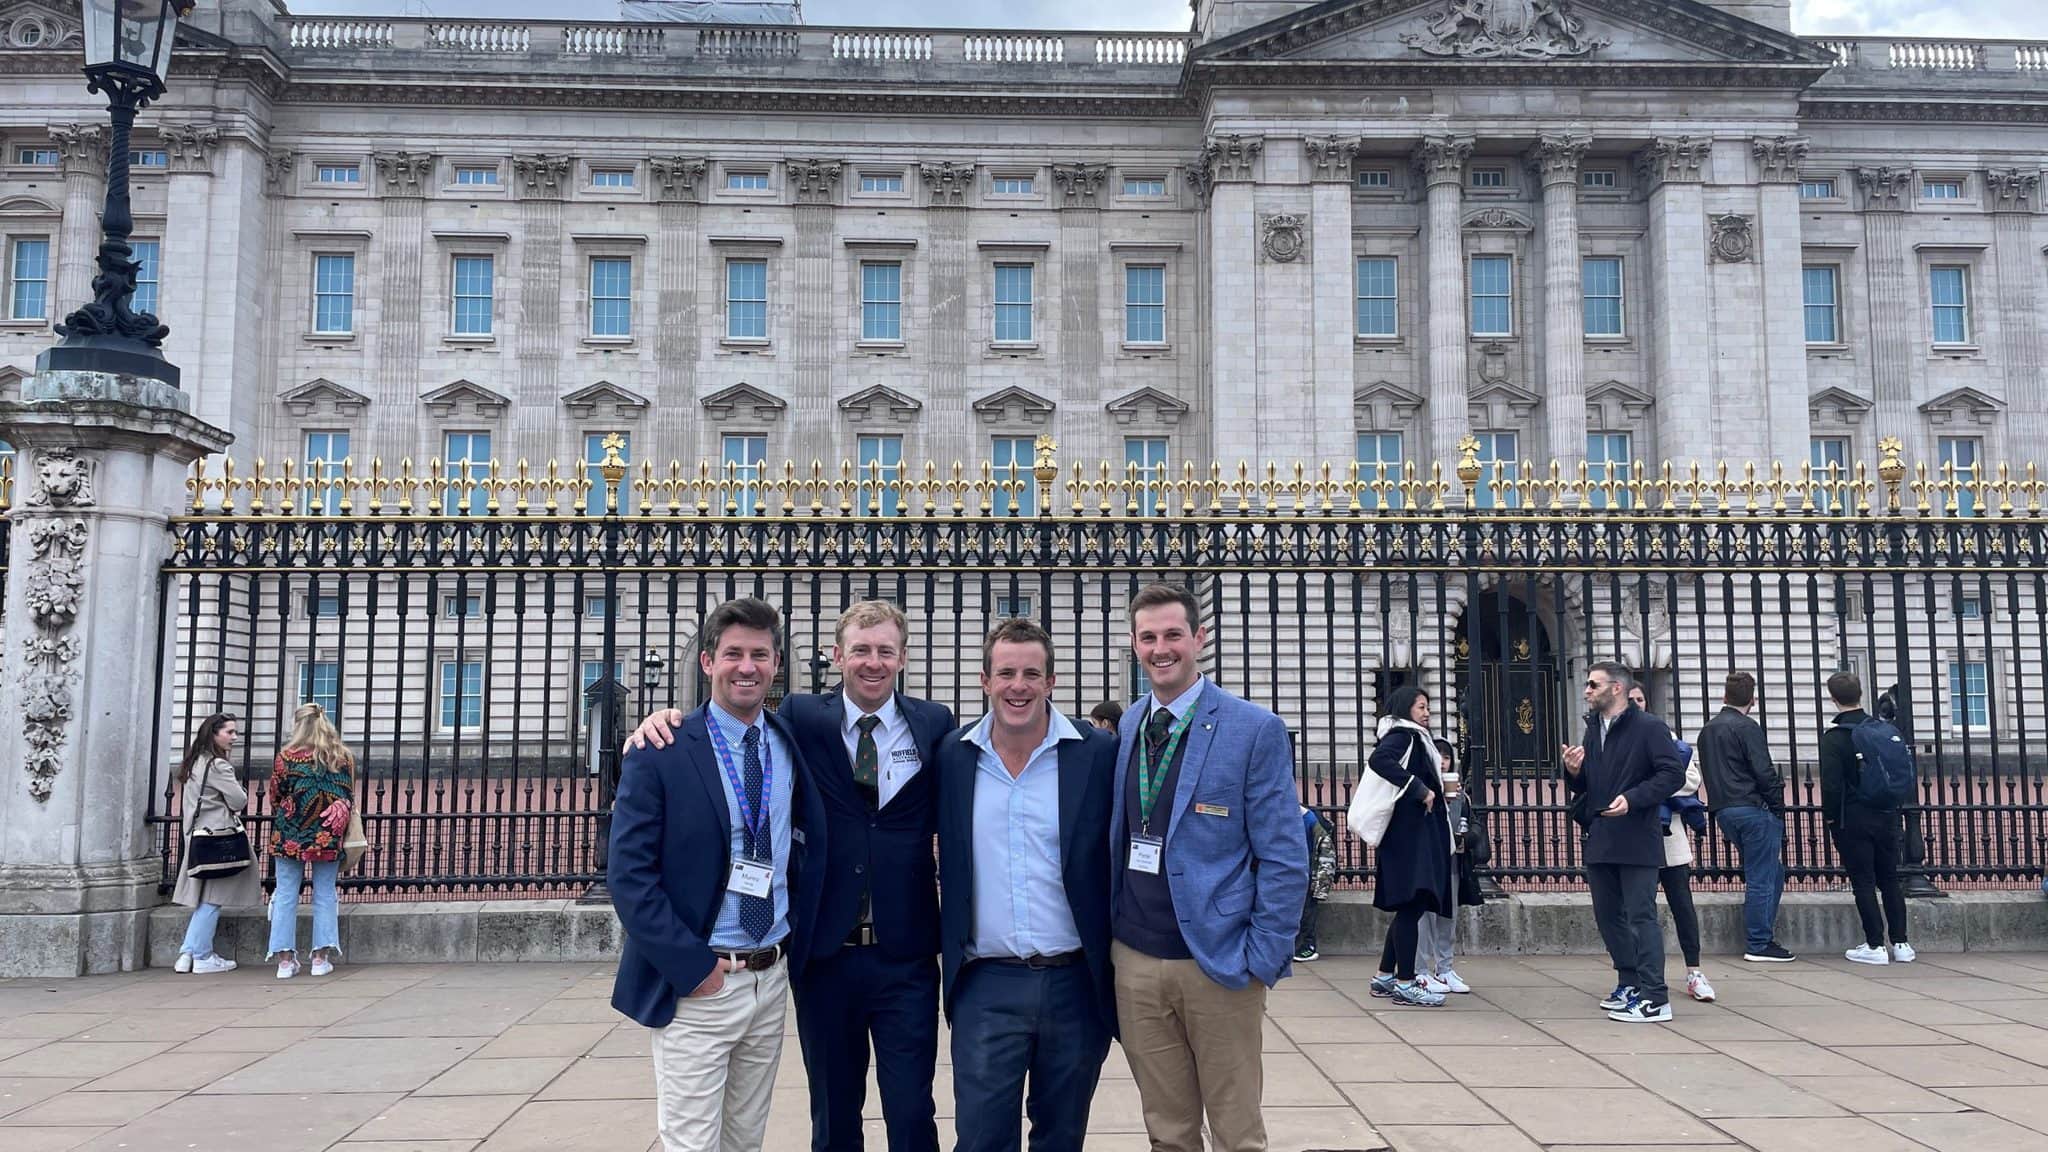 From left: 2022 Nuffield Scholars Munro Hardy and Jesse Moody, with 2021 Nuffield Scholars Andrew Rolfe and Pieter van Jaarsveld travelled as part of their Nuffield Australia Scholarships earlier this month.